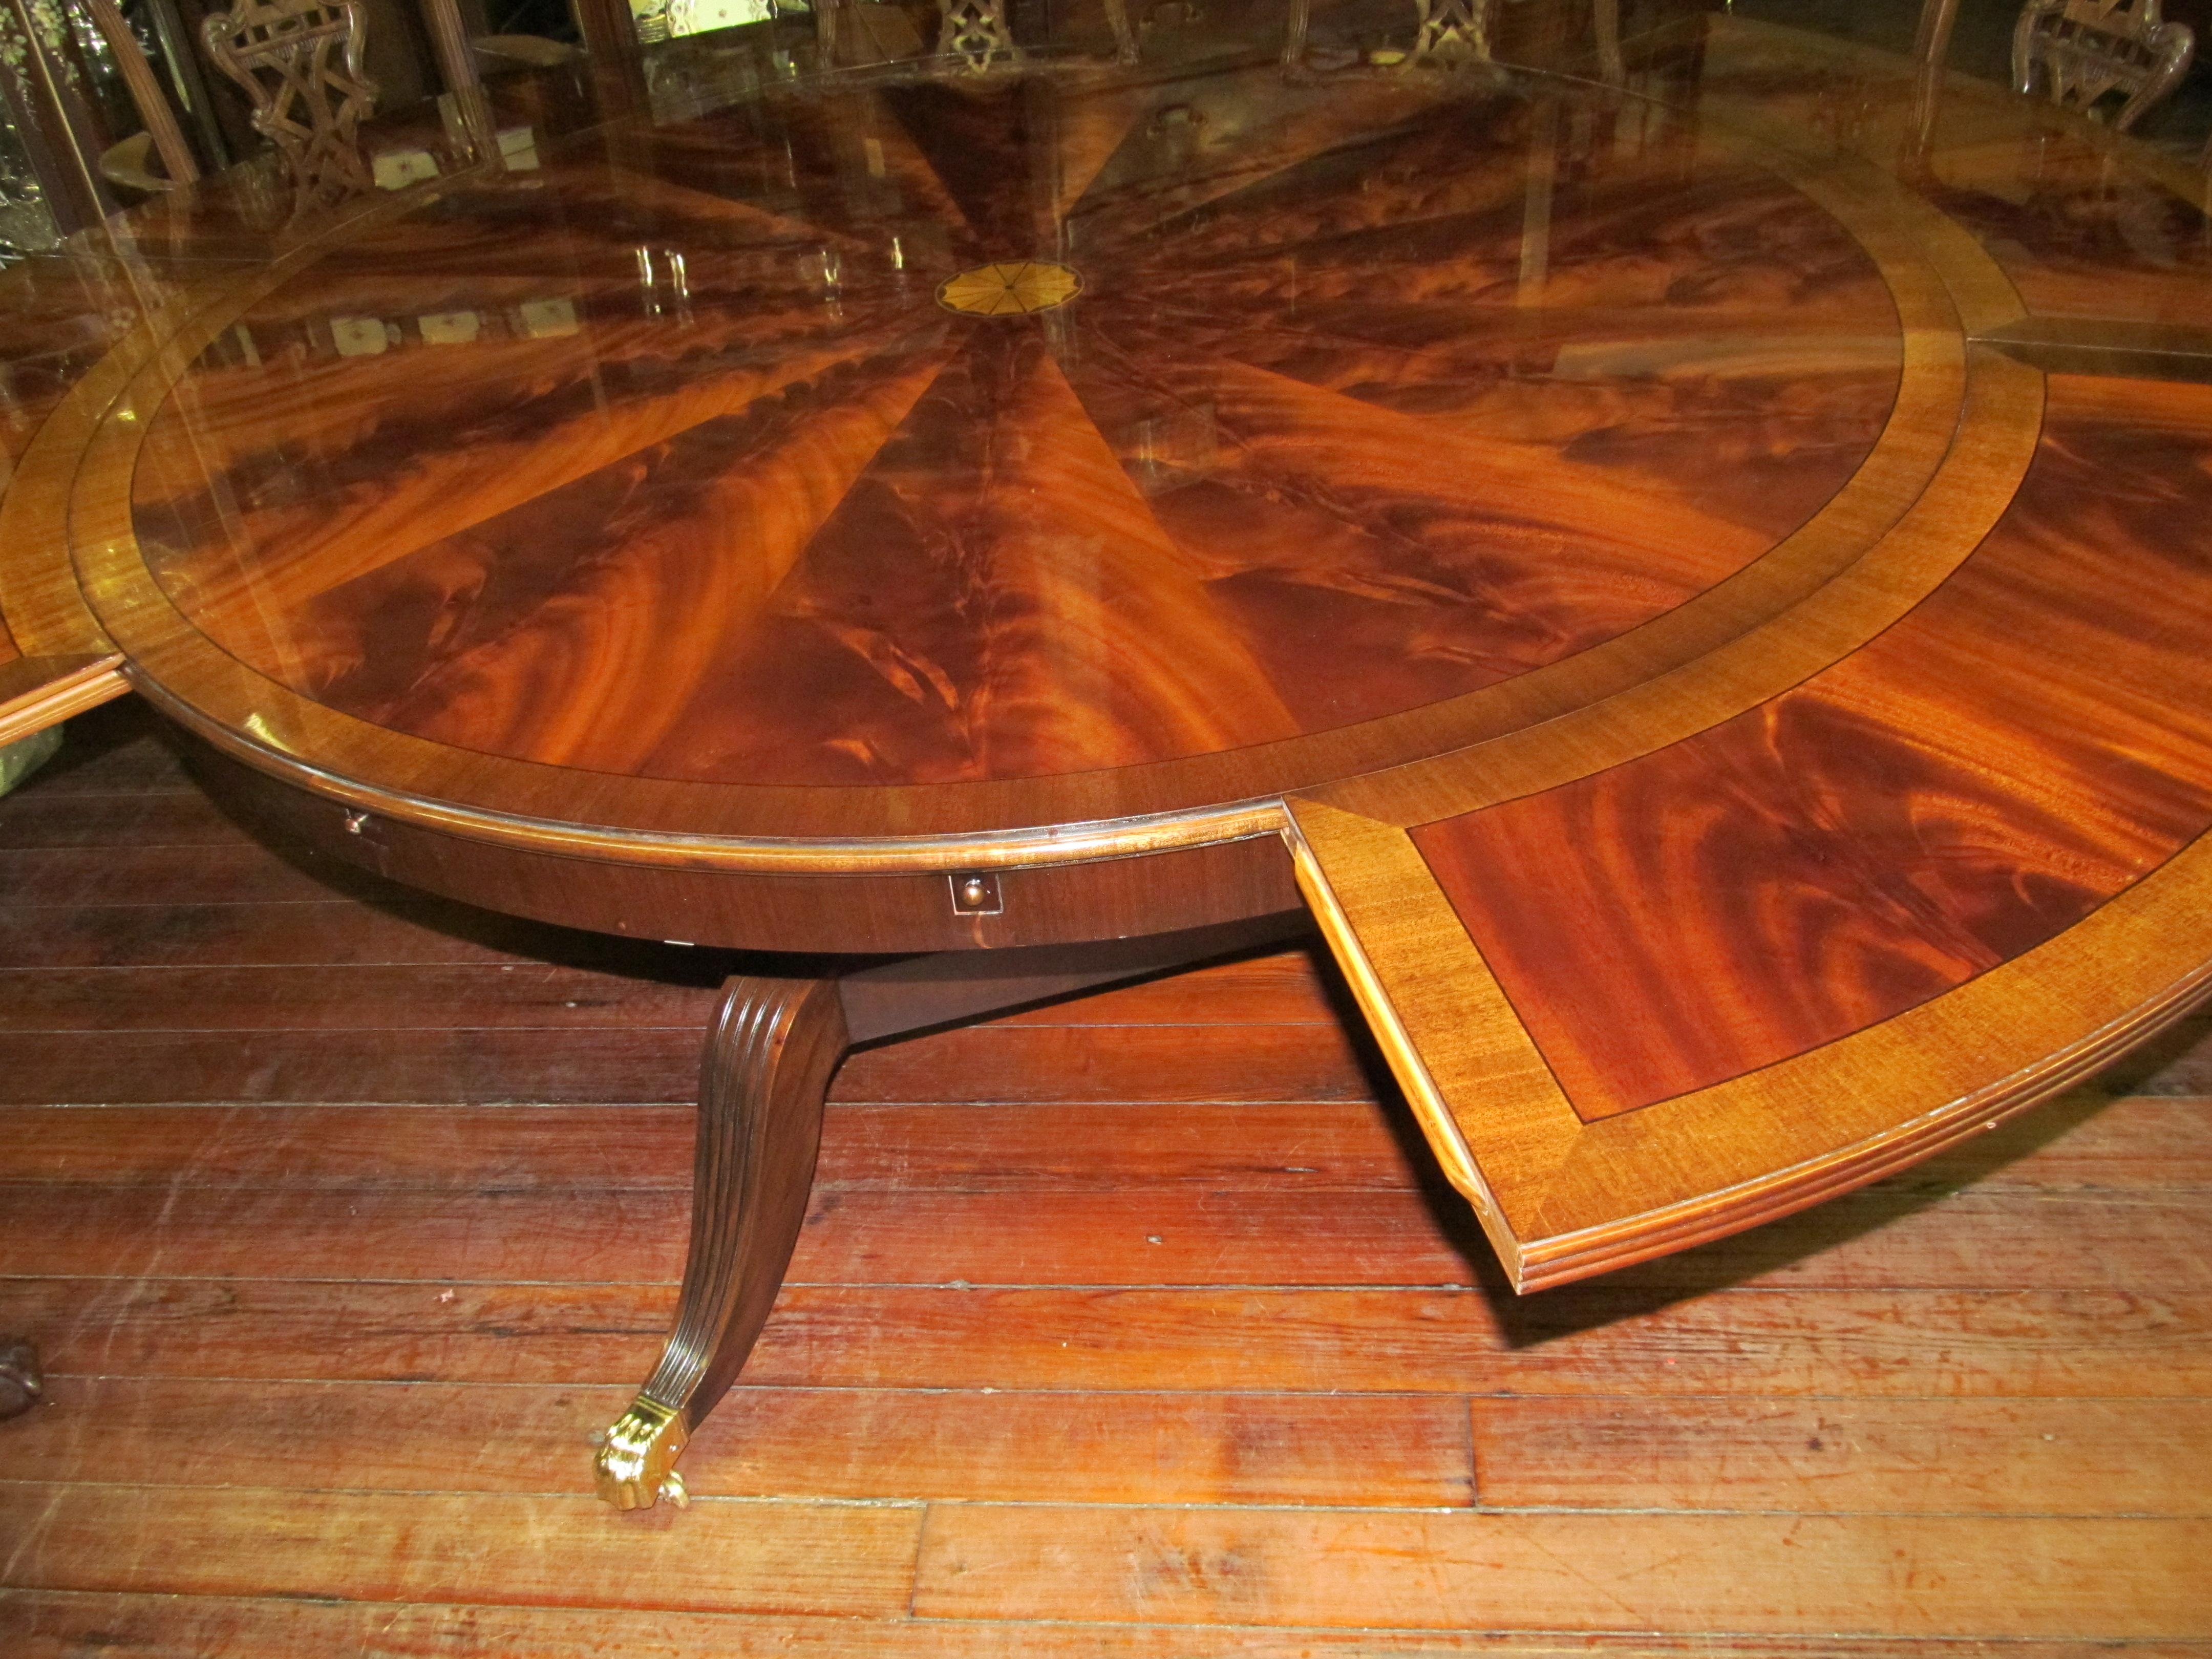 Benchmade Bookmatched Flame Mahogany Perimeter Leaf Circular Dining Table For Sale 10